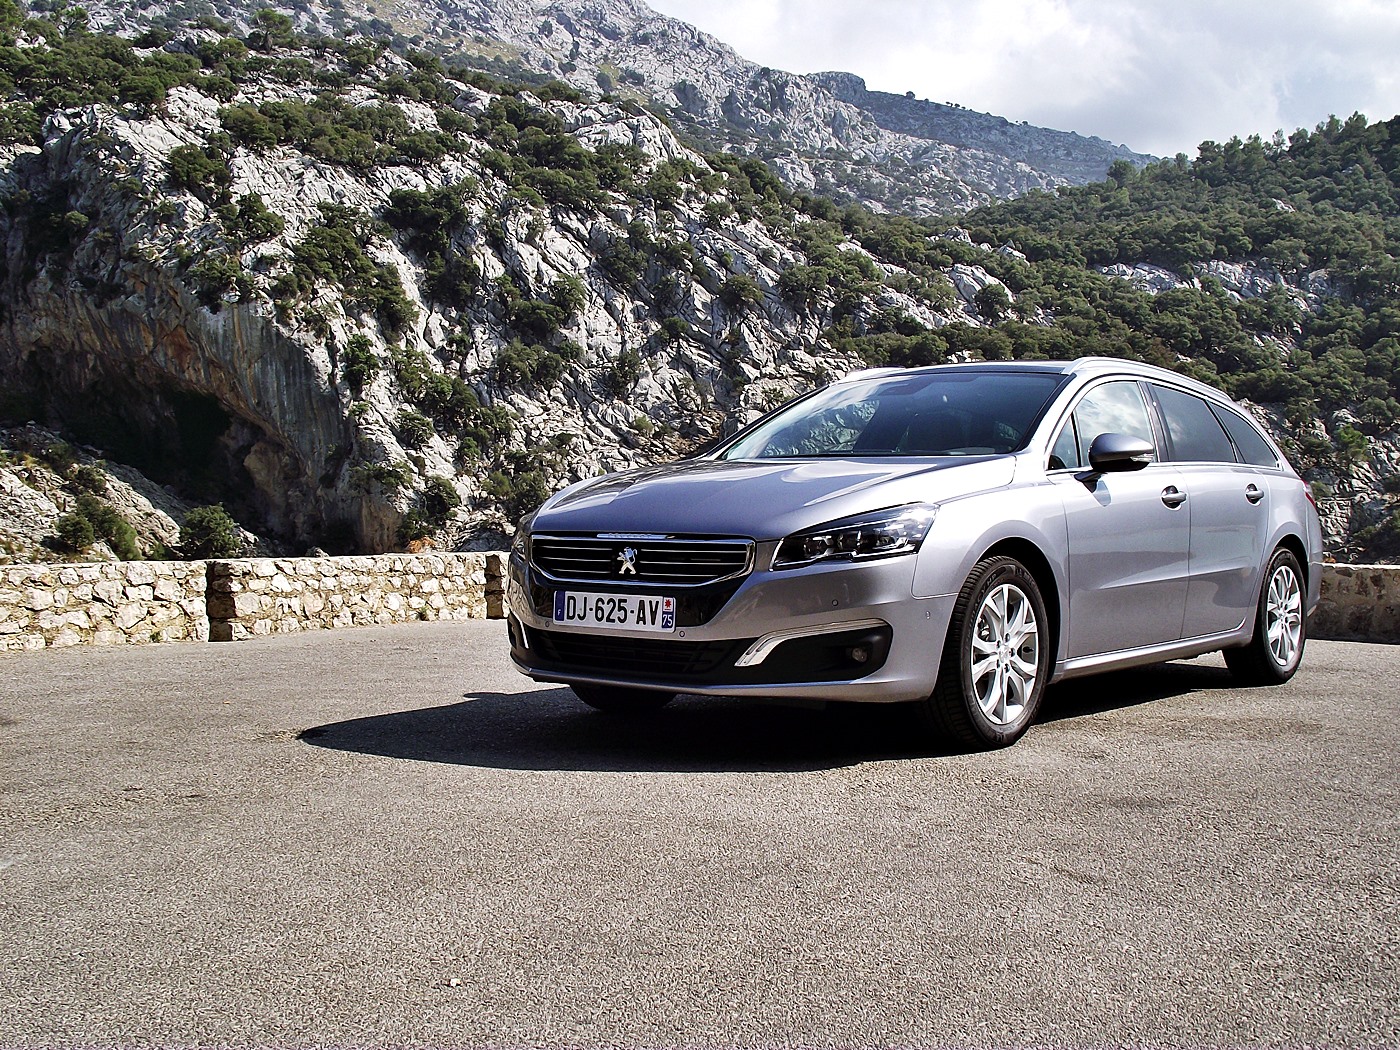 Peugeot 508 2.0 HDI Allure - French middle class